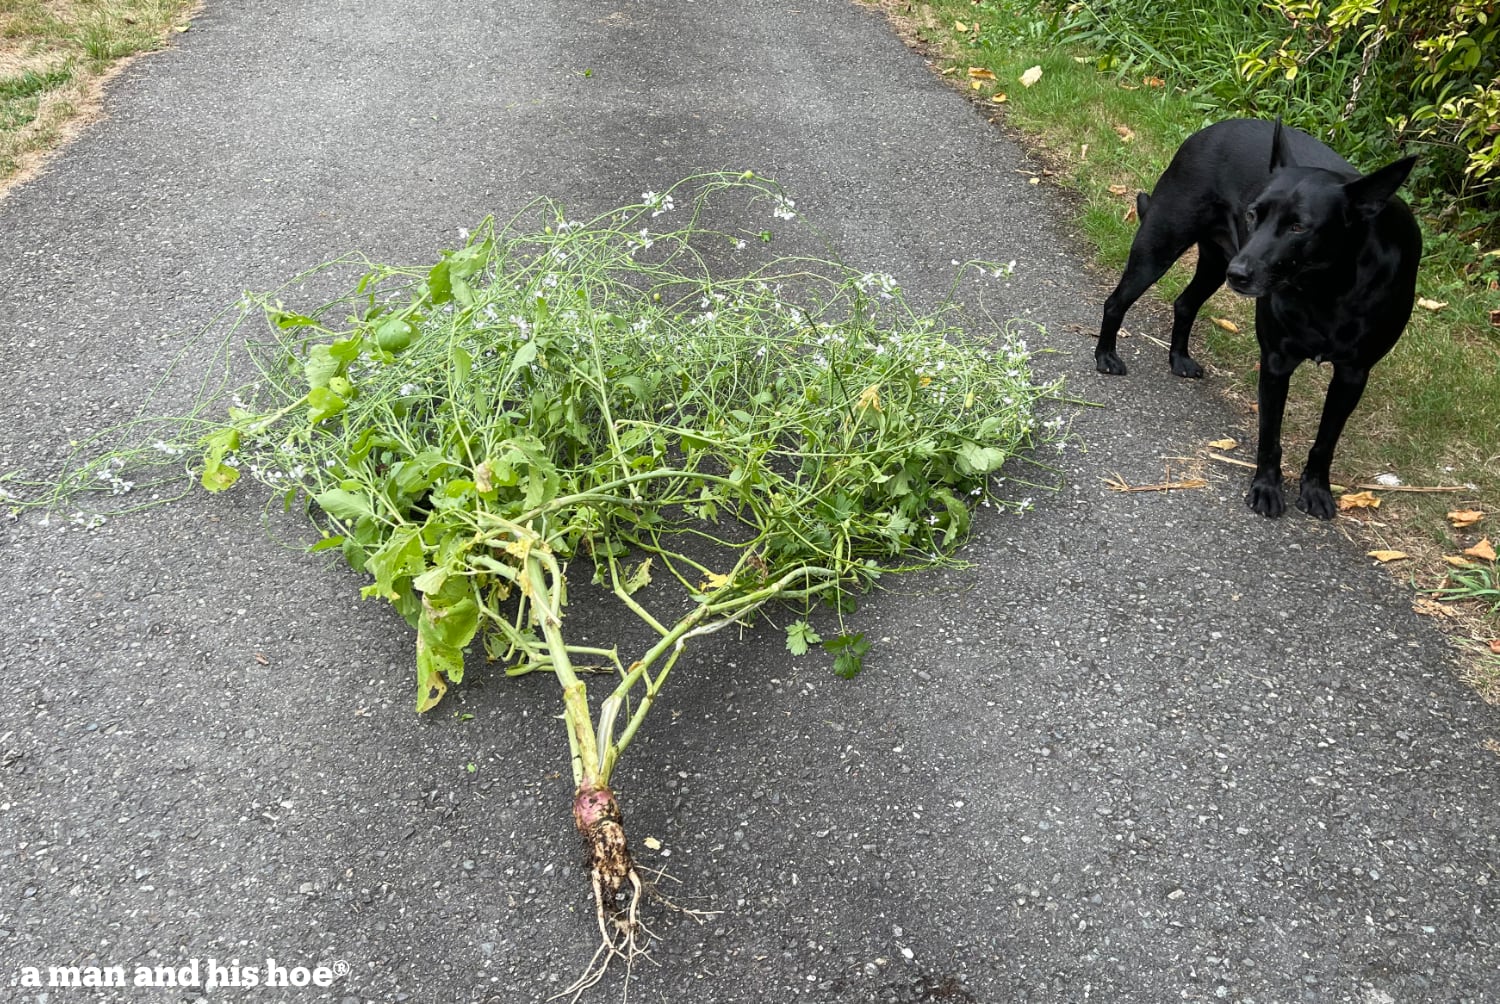 Radish plant pulled out of the ground and spread out on the pavement.